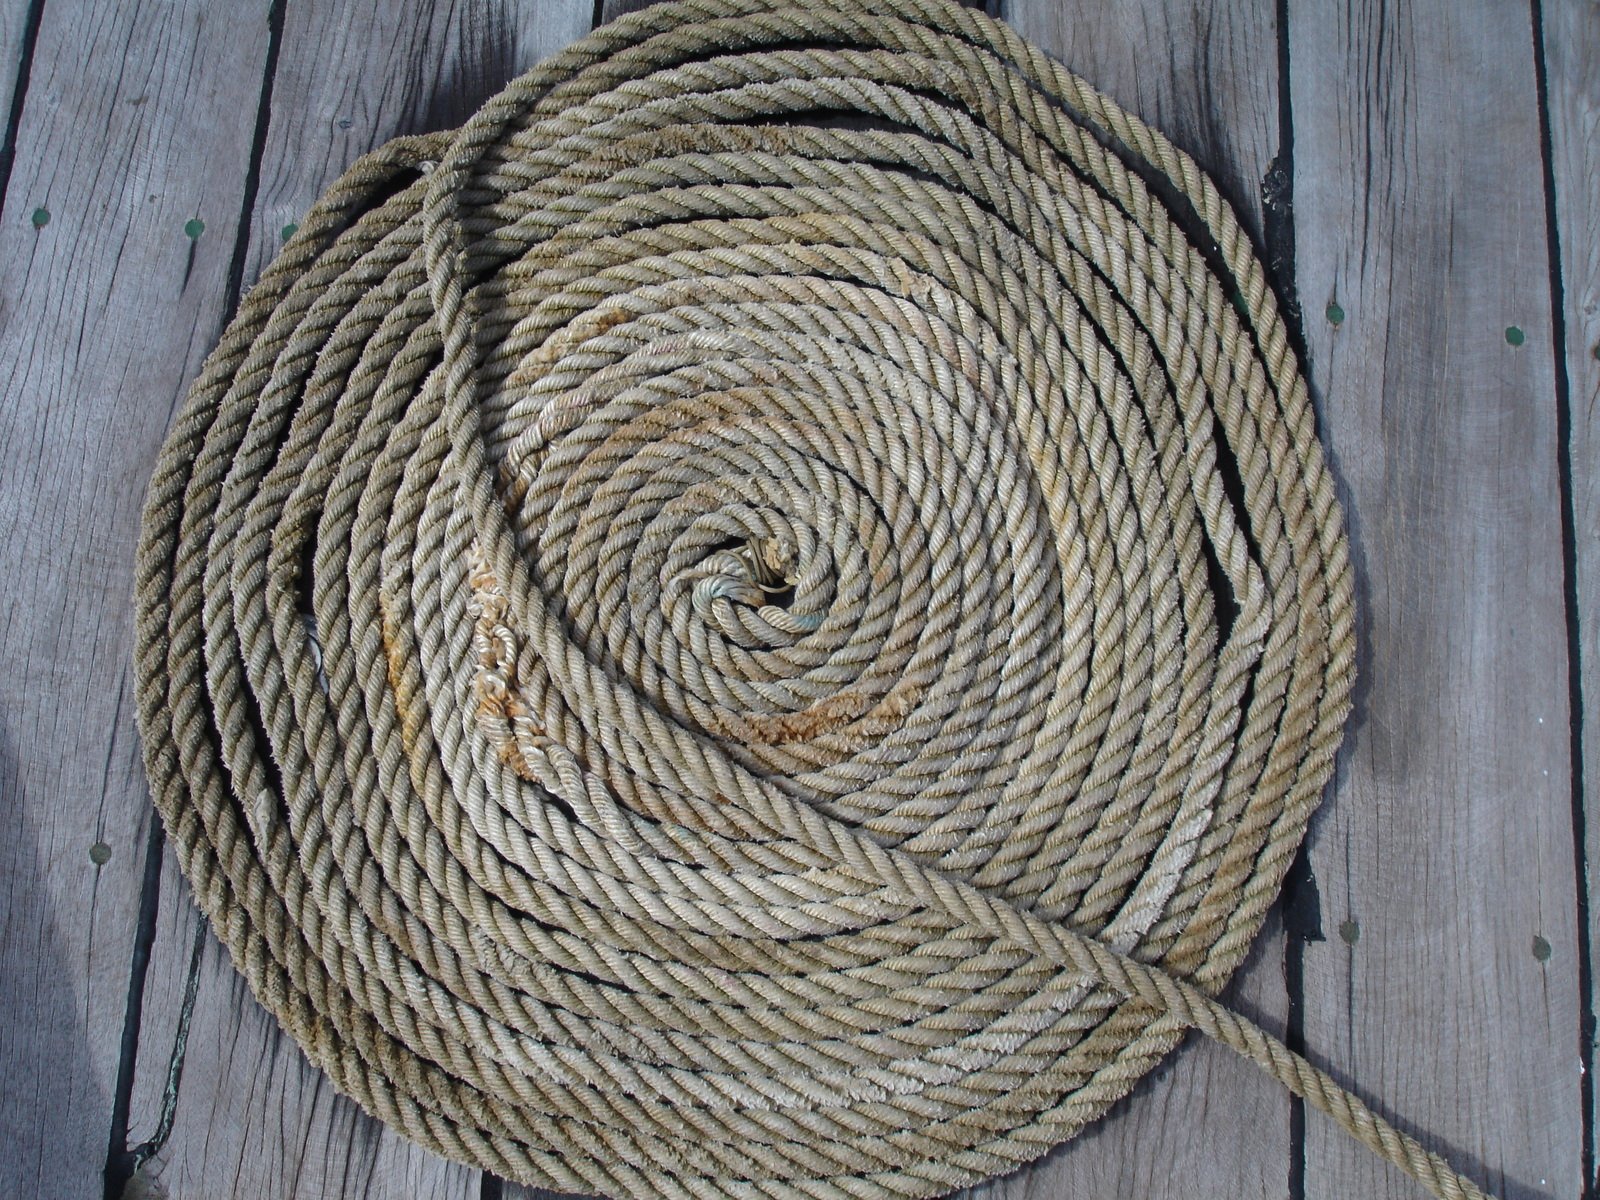 a close up of a rope on wooden floors